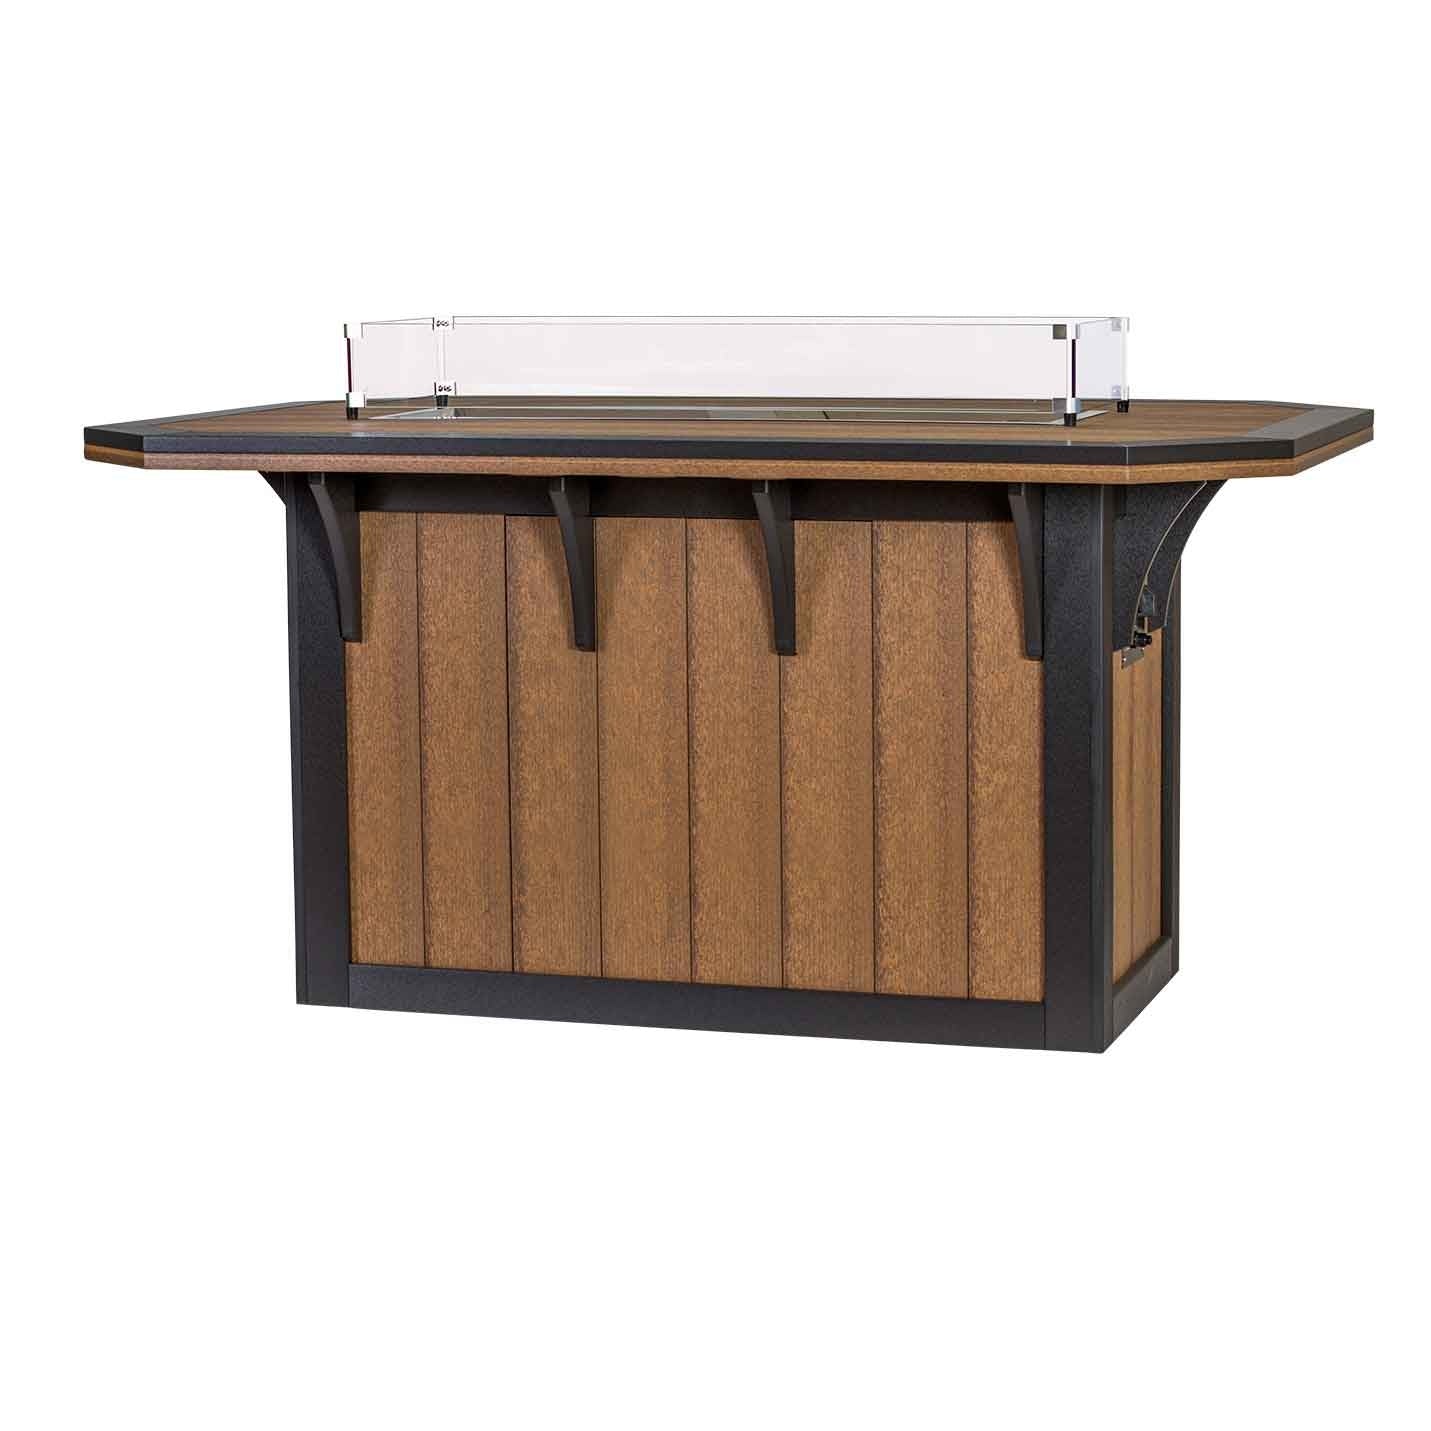 Summerside Fire Counter Table - snyders.furniture